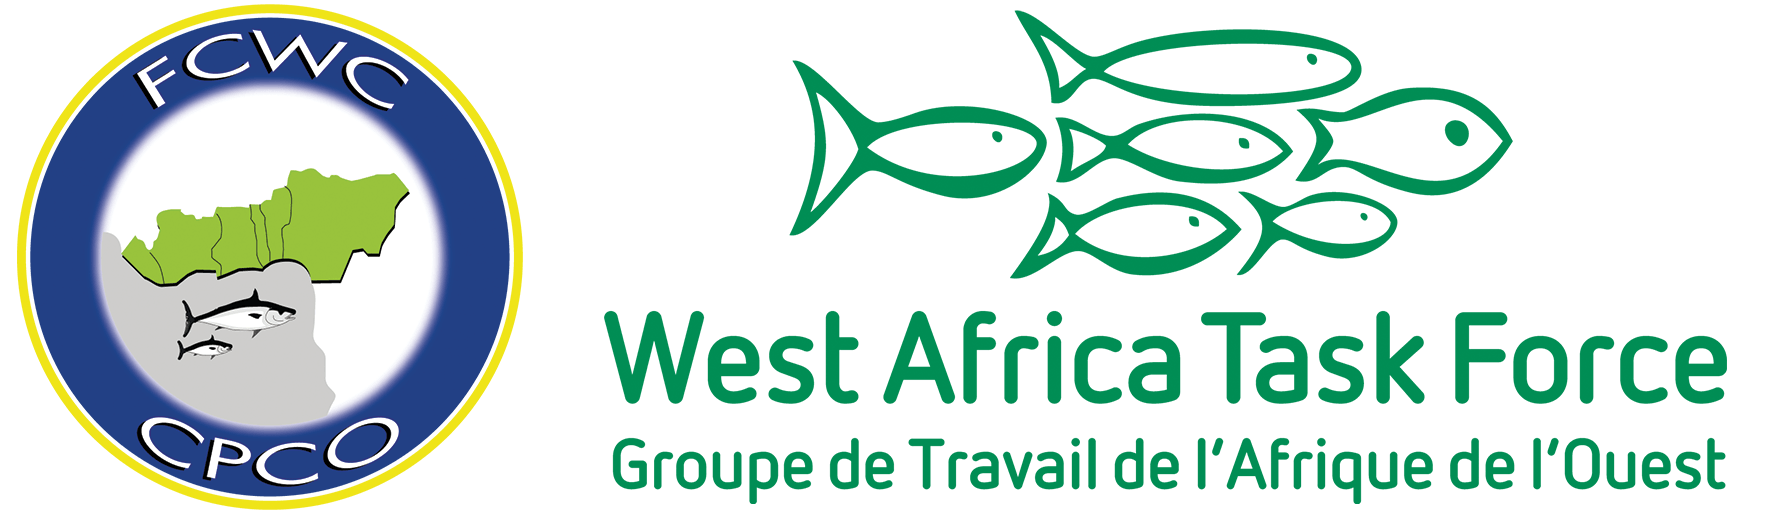 FCWC West Africa Task Force to Hold Fourteenth Regional Meeting in Togo